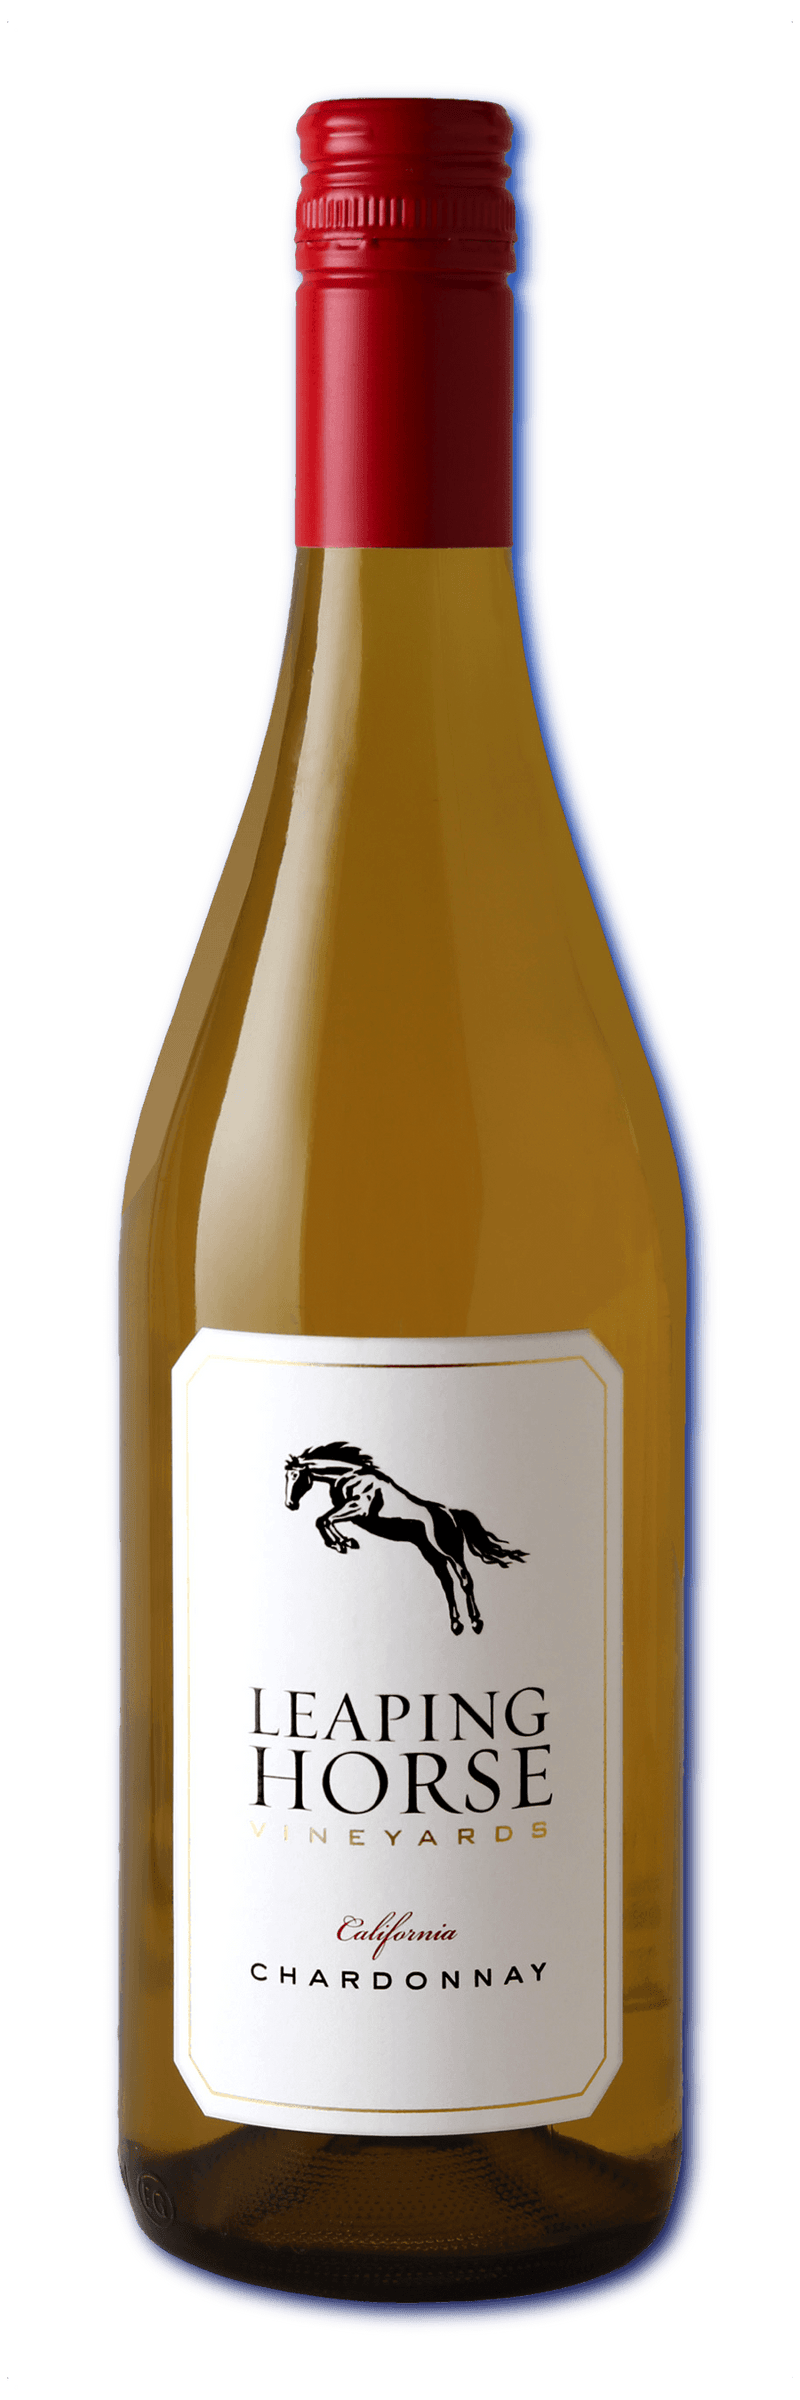 LEAPING HORSE CHARDONNAY